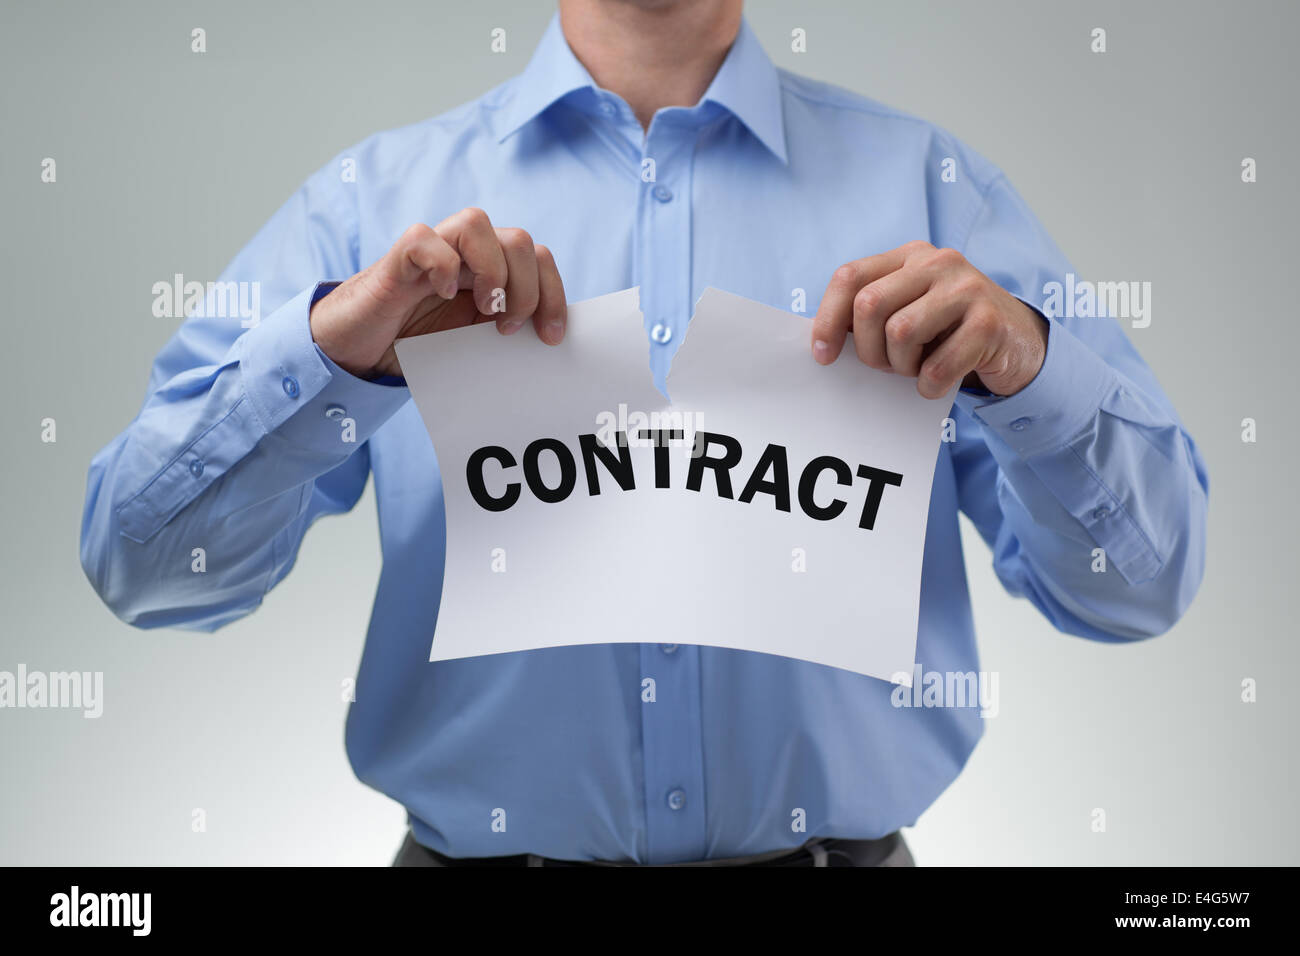 Tearing up the contract Stock Photo